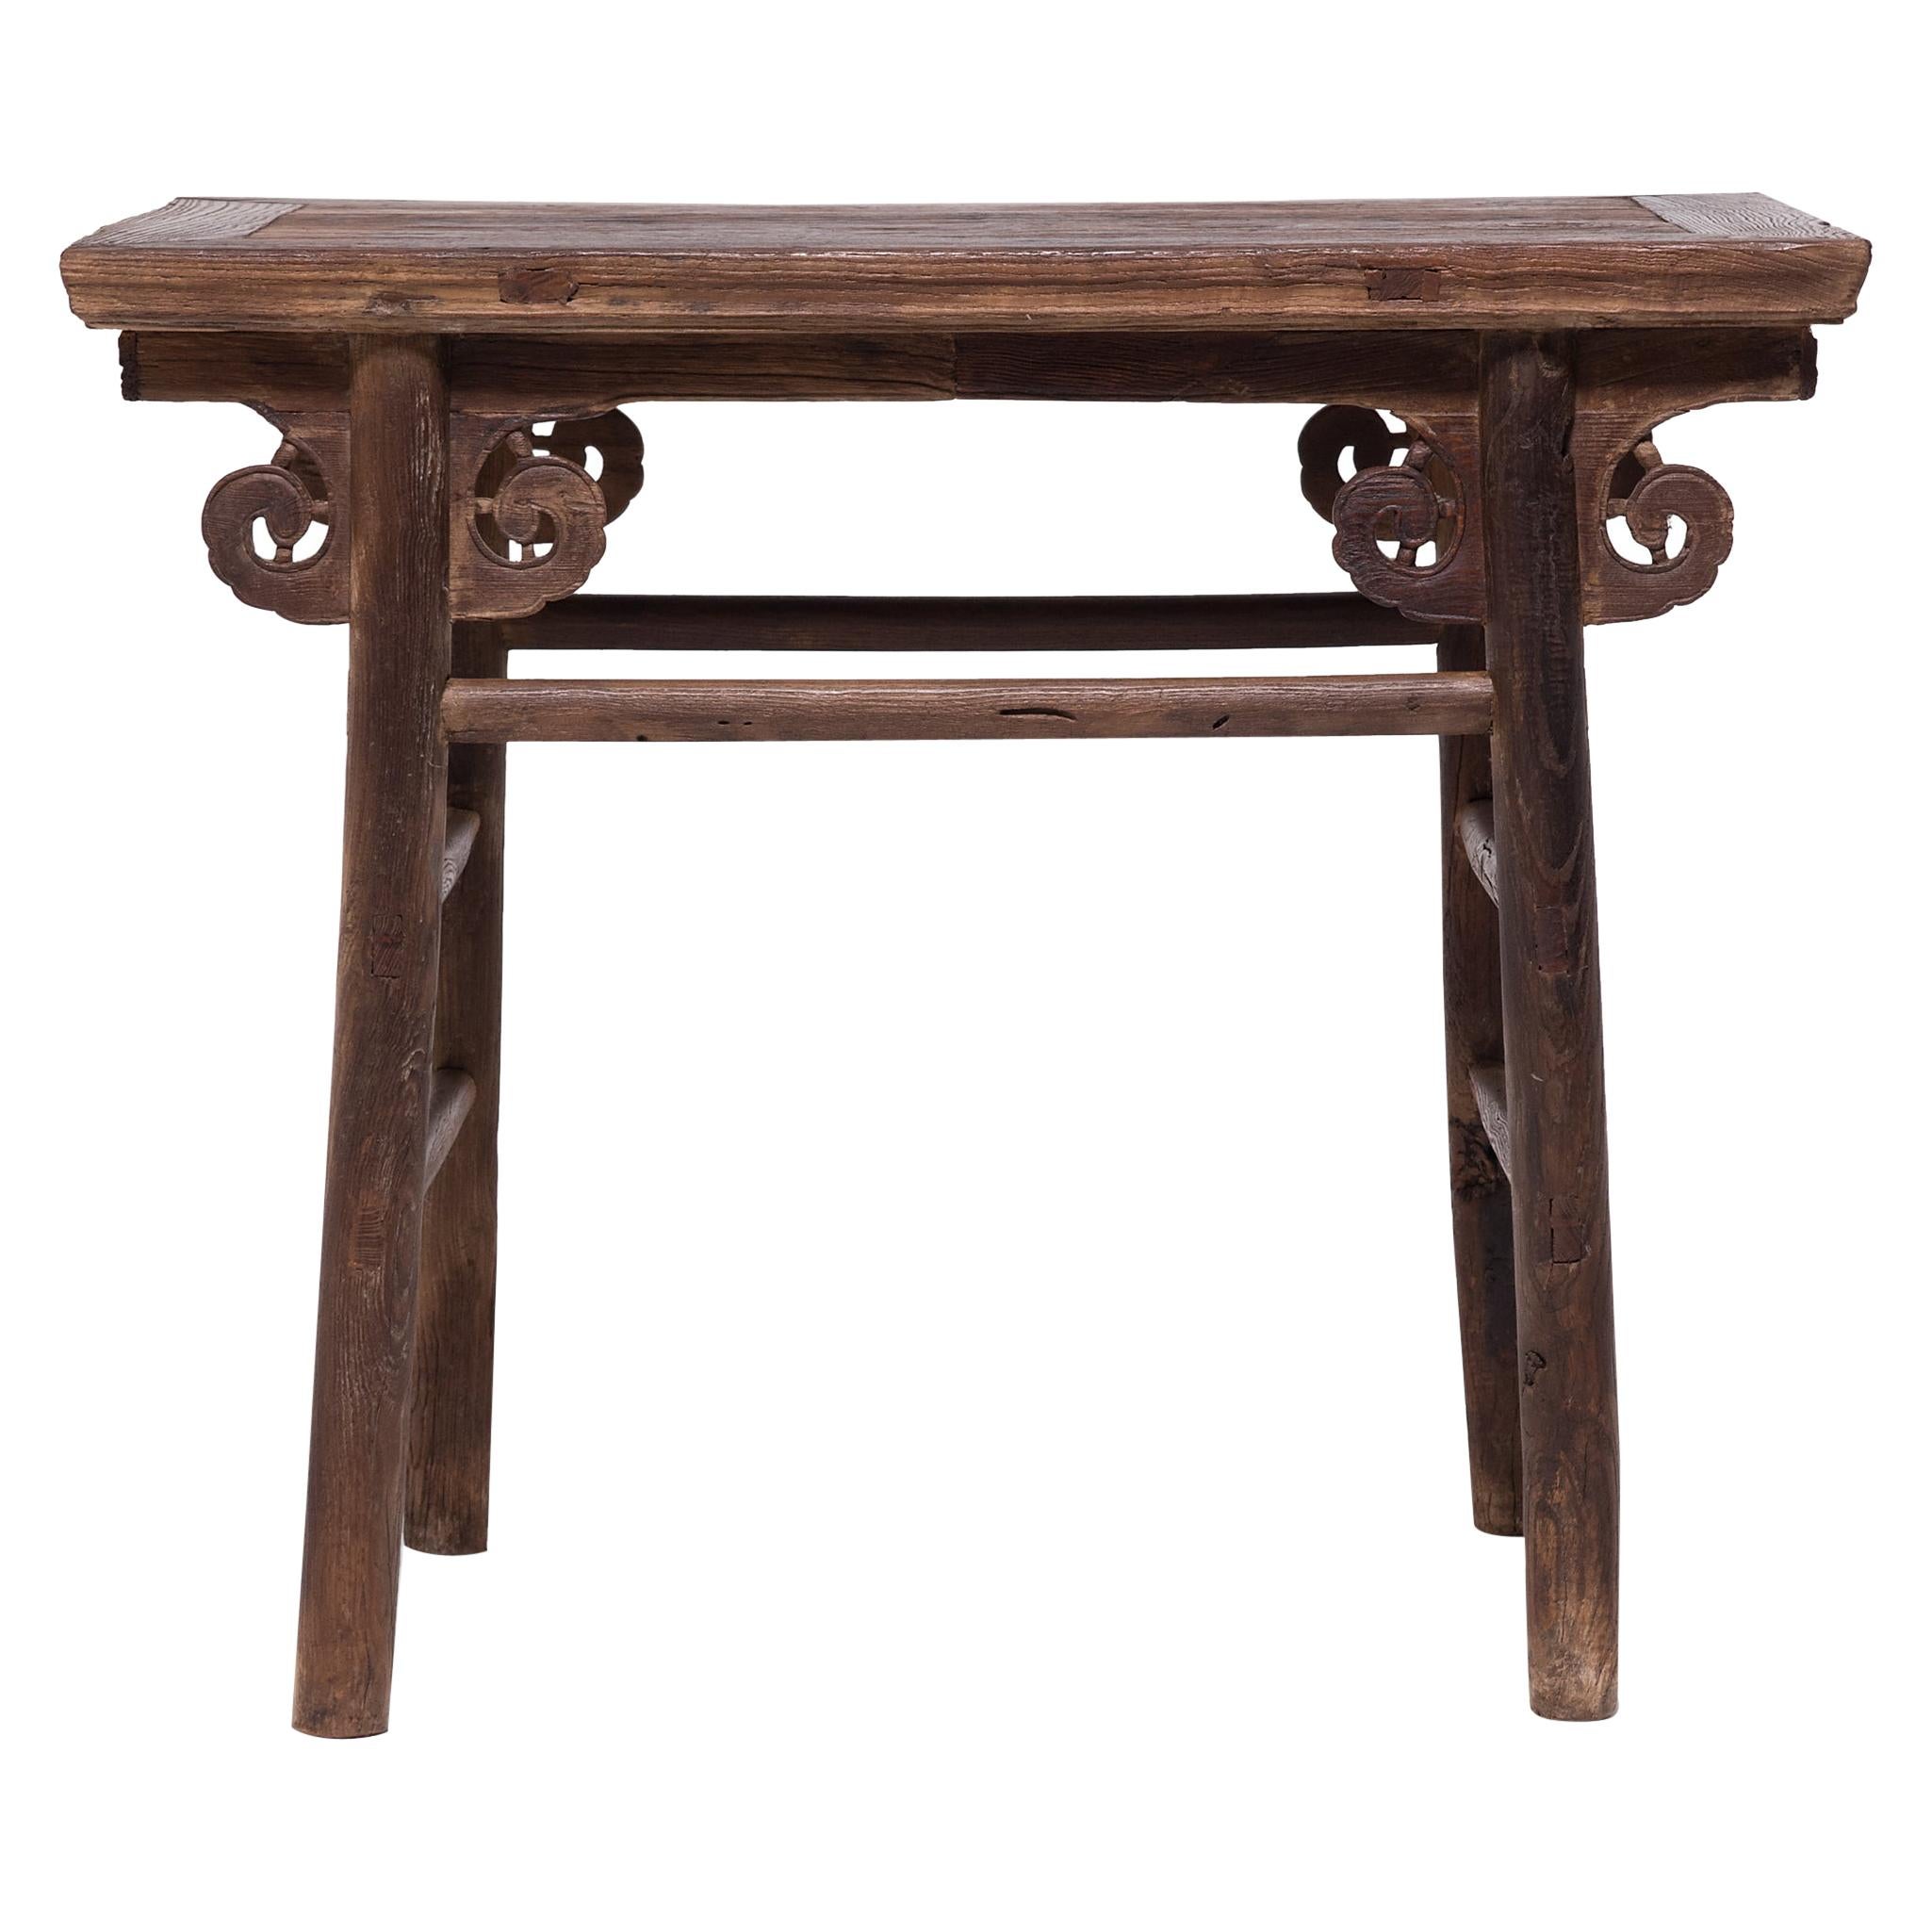 Chinese Wine Table with Cloud Spandrels, c. 1750